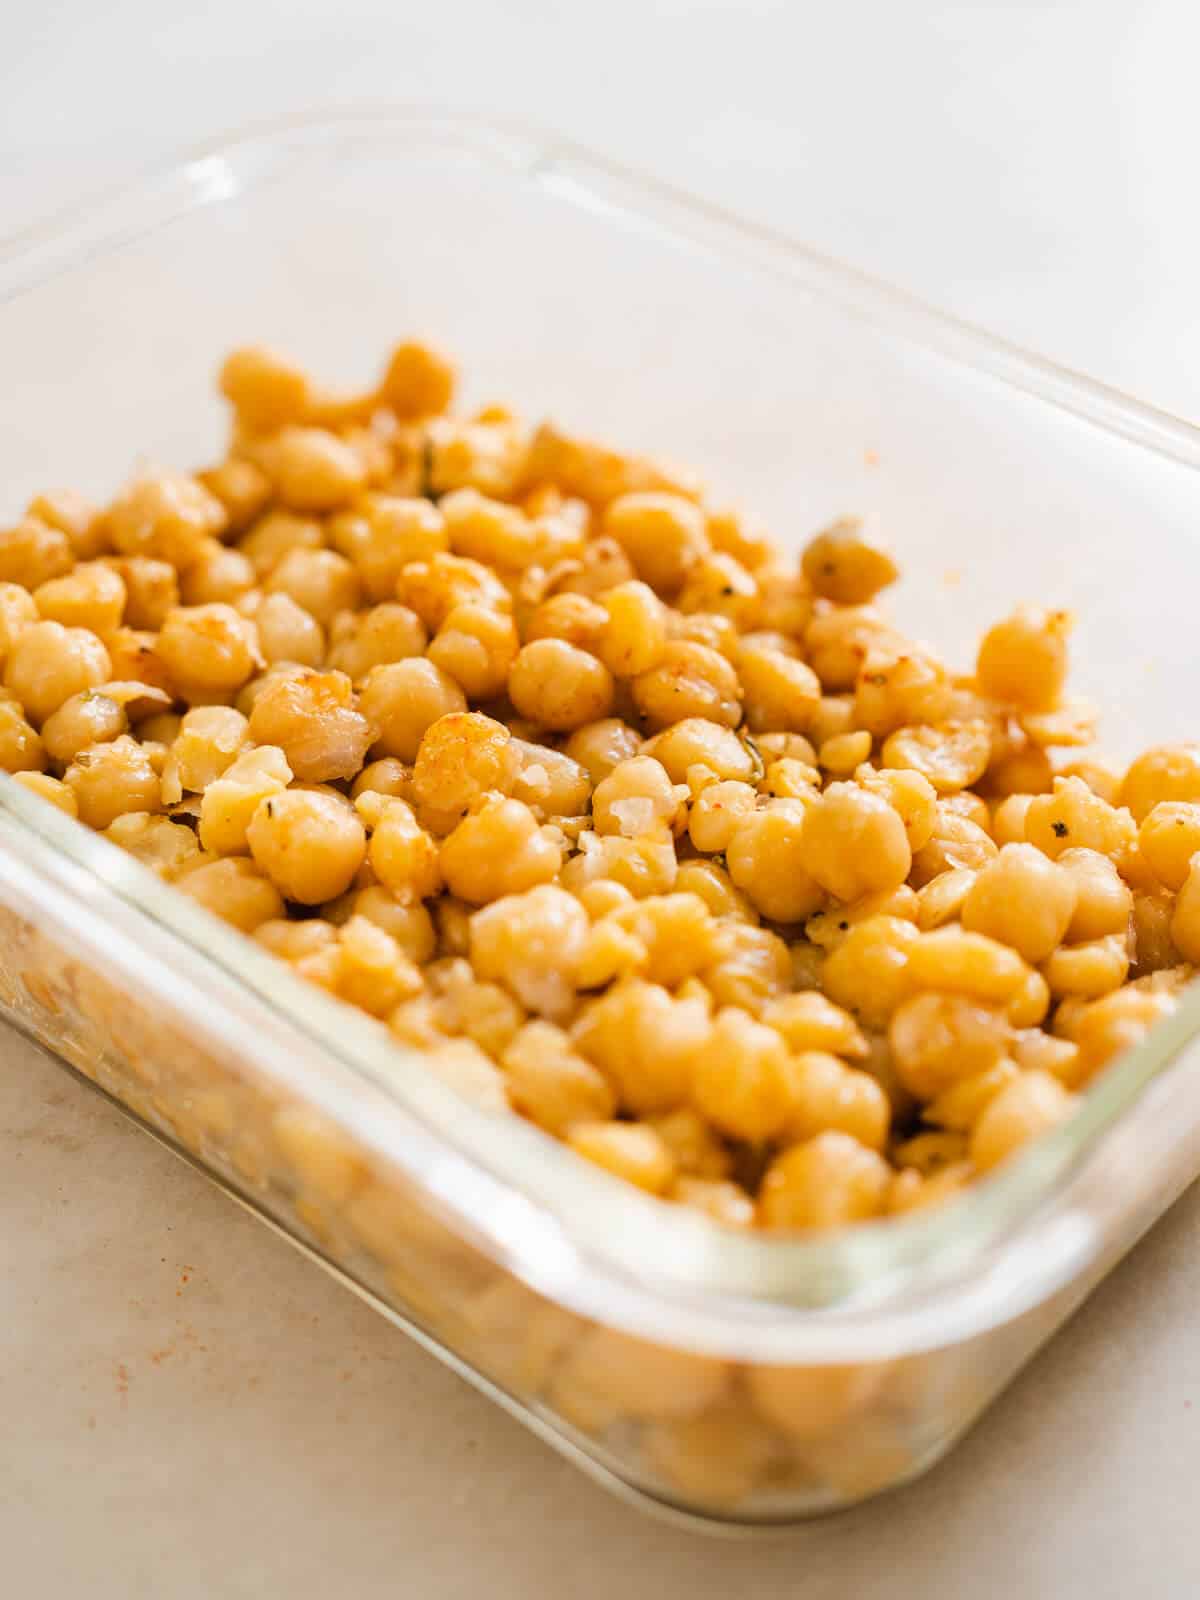 store cooked chickpeas using an airtight container.